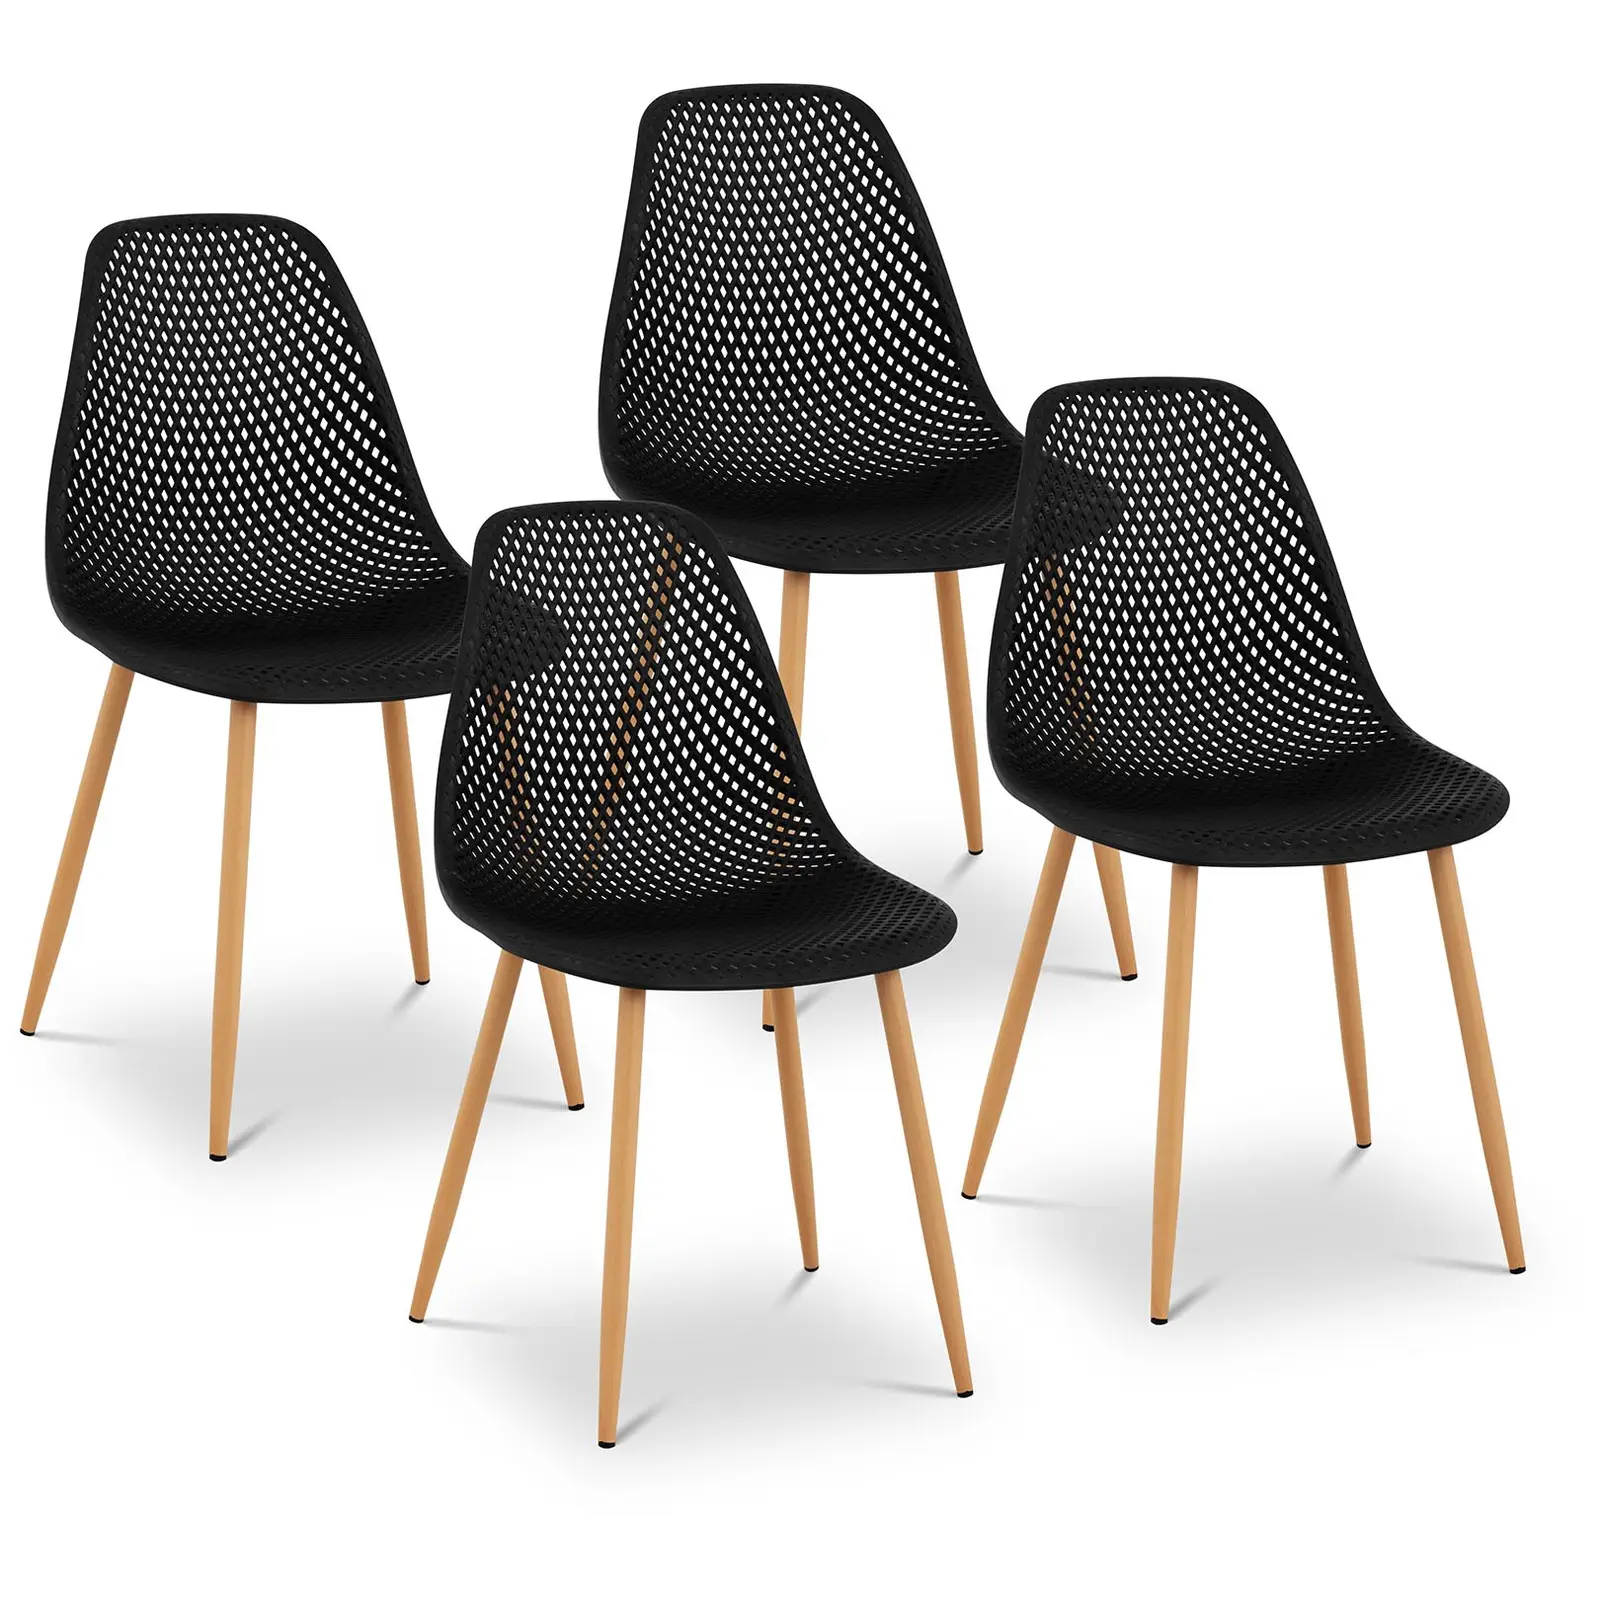 Chair - set of 4 - up to 150 kg - seat 40 x 46 cm - black